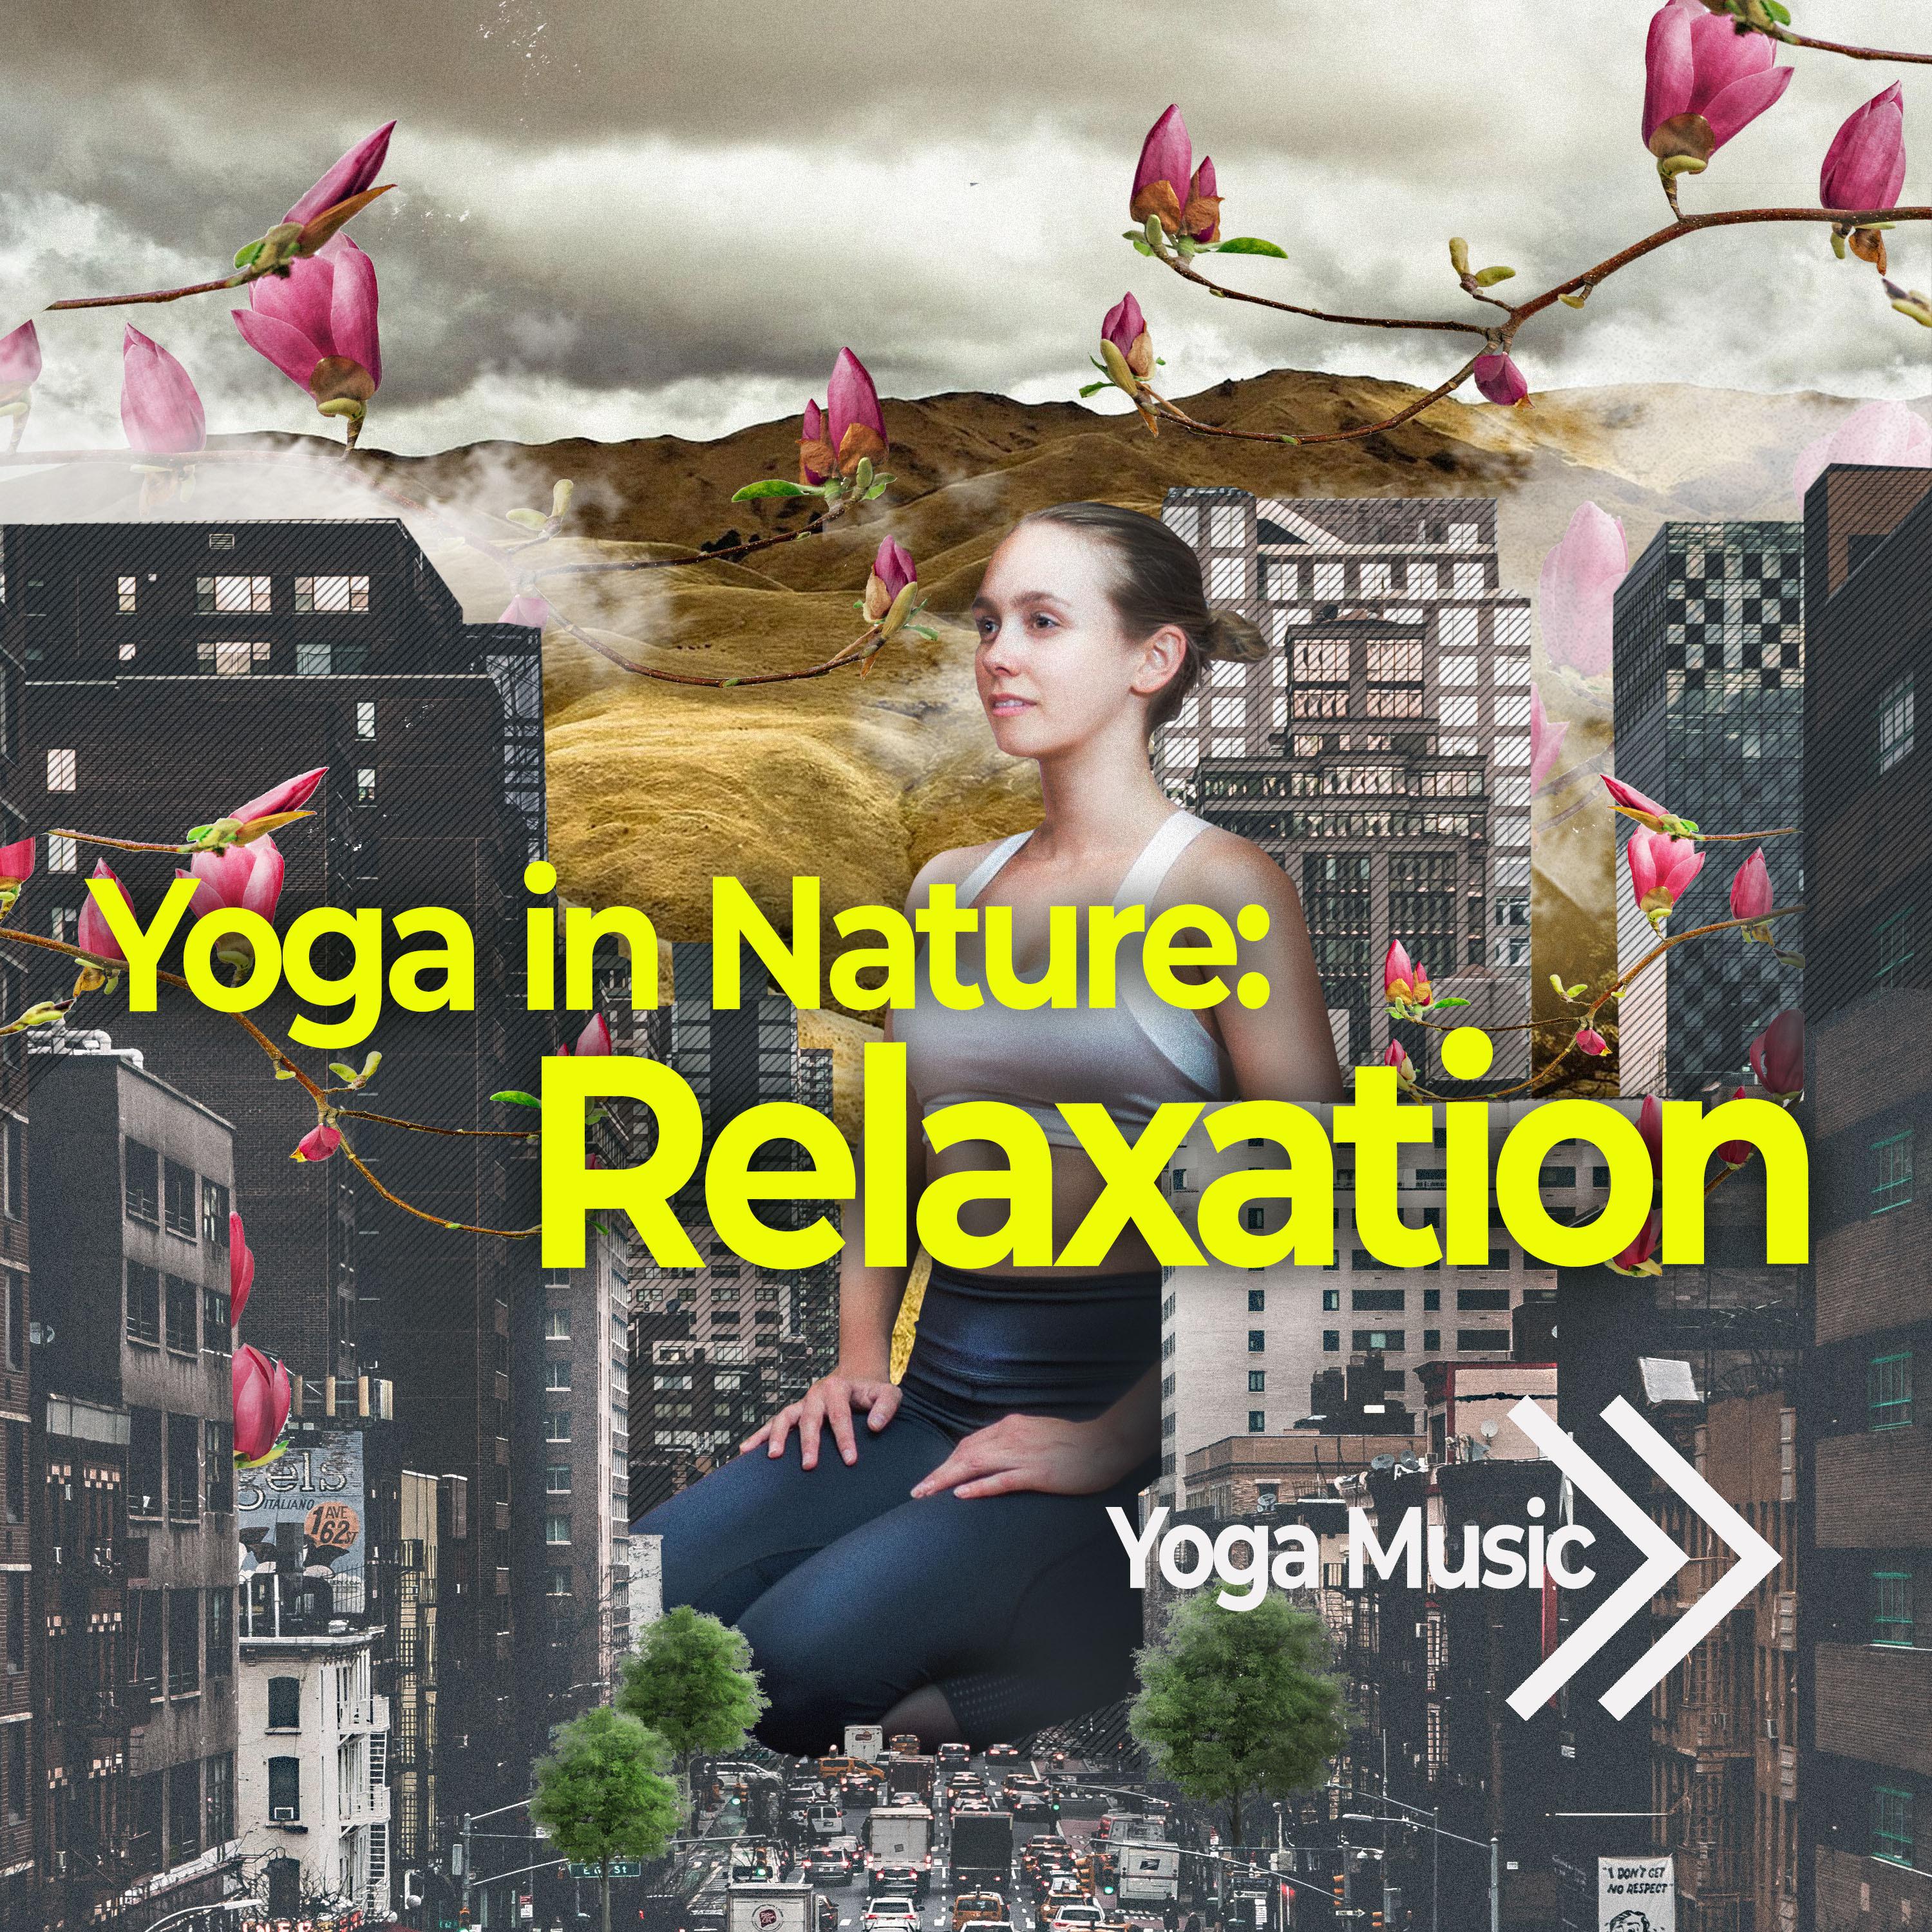 Yoga in Nature: Relaxation